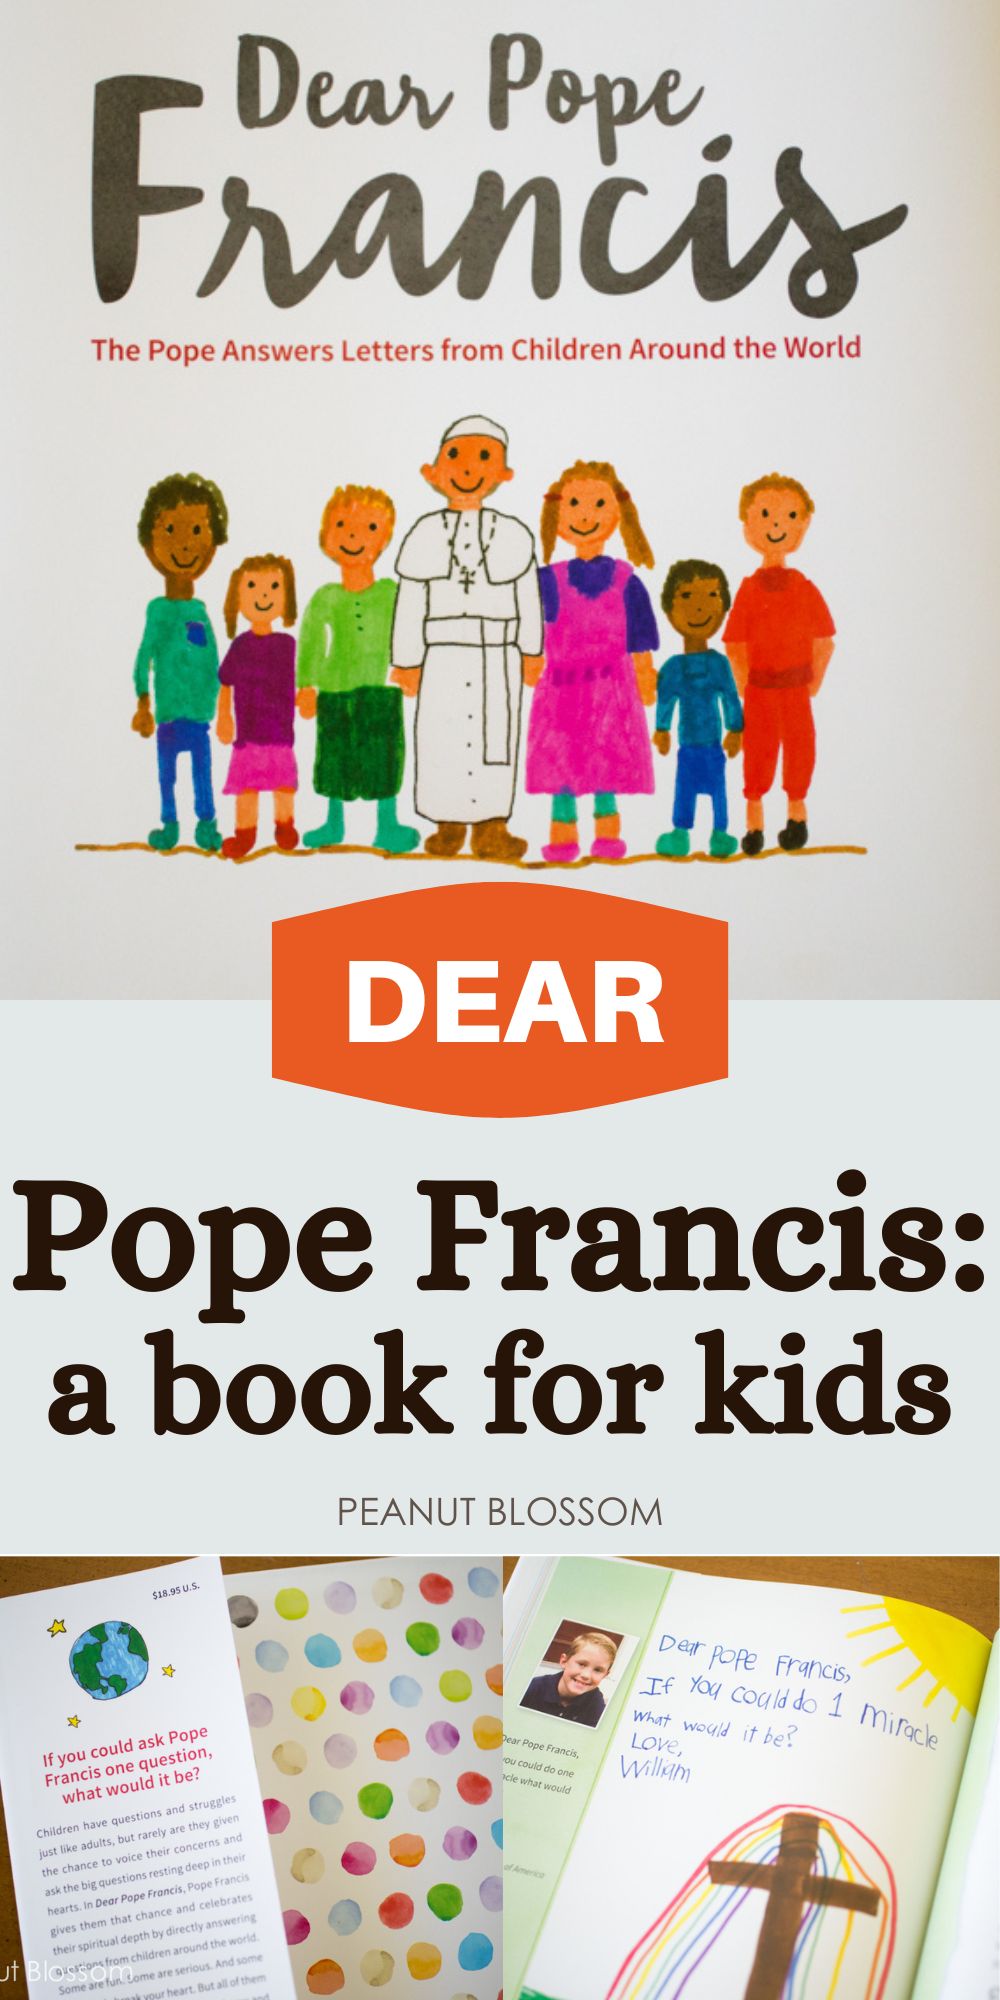 The photo collage shows a peek inside the book Dear Pope Francis.